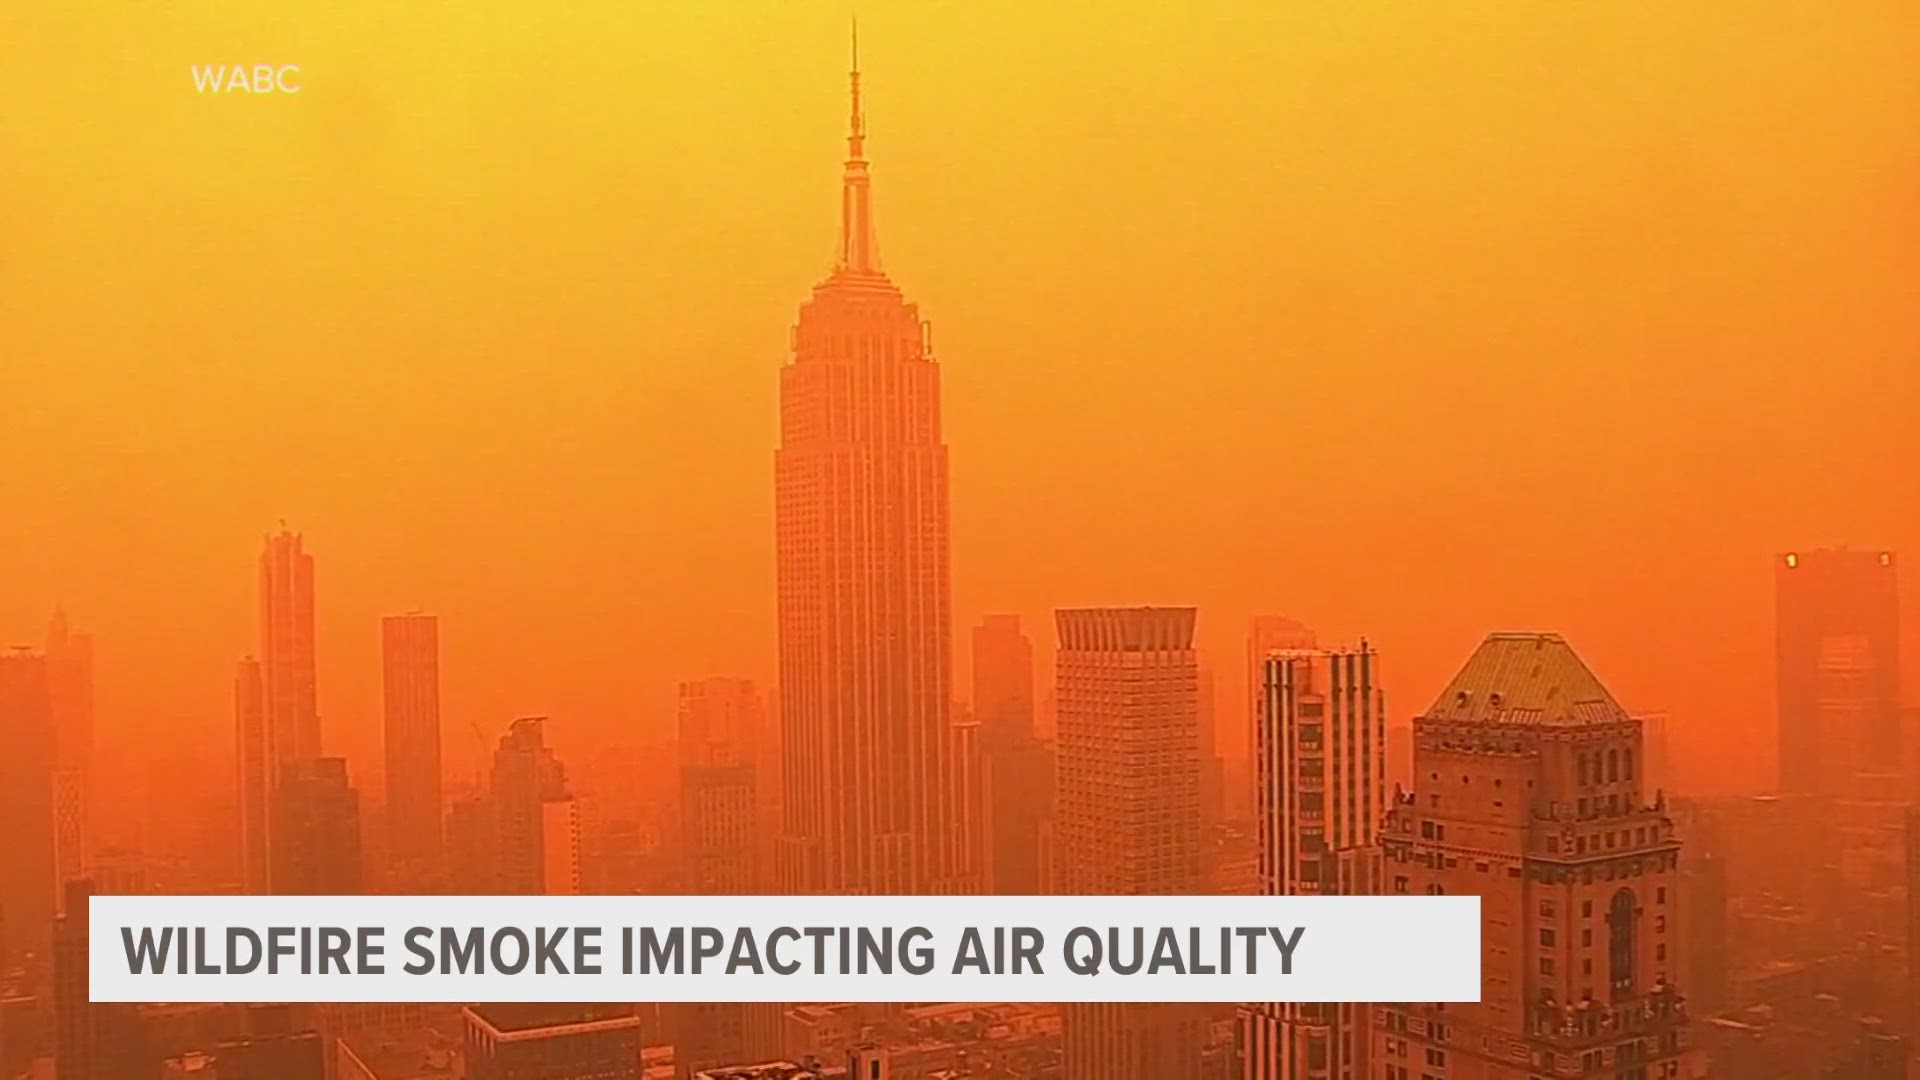 Air quality has been top of mind for many around the country this week as smoke from wildfires in Canada continues to filter down to the south.